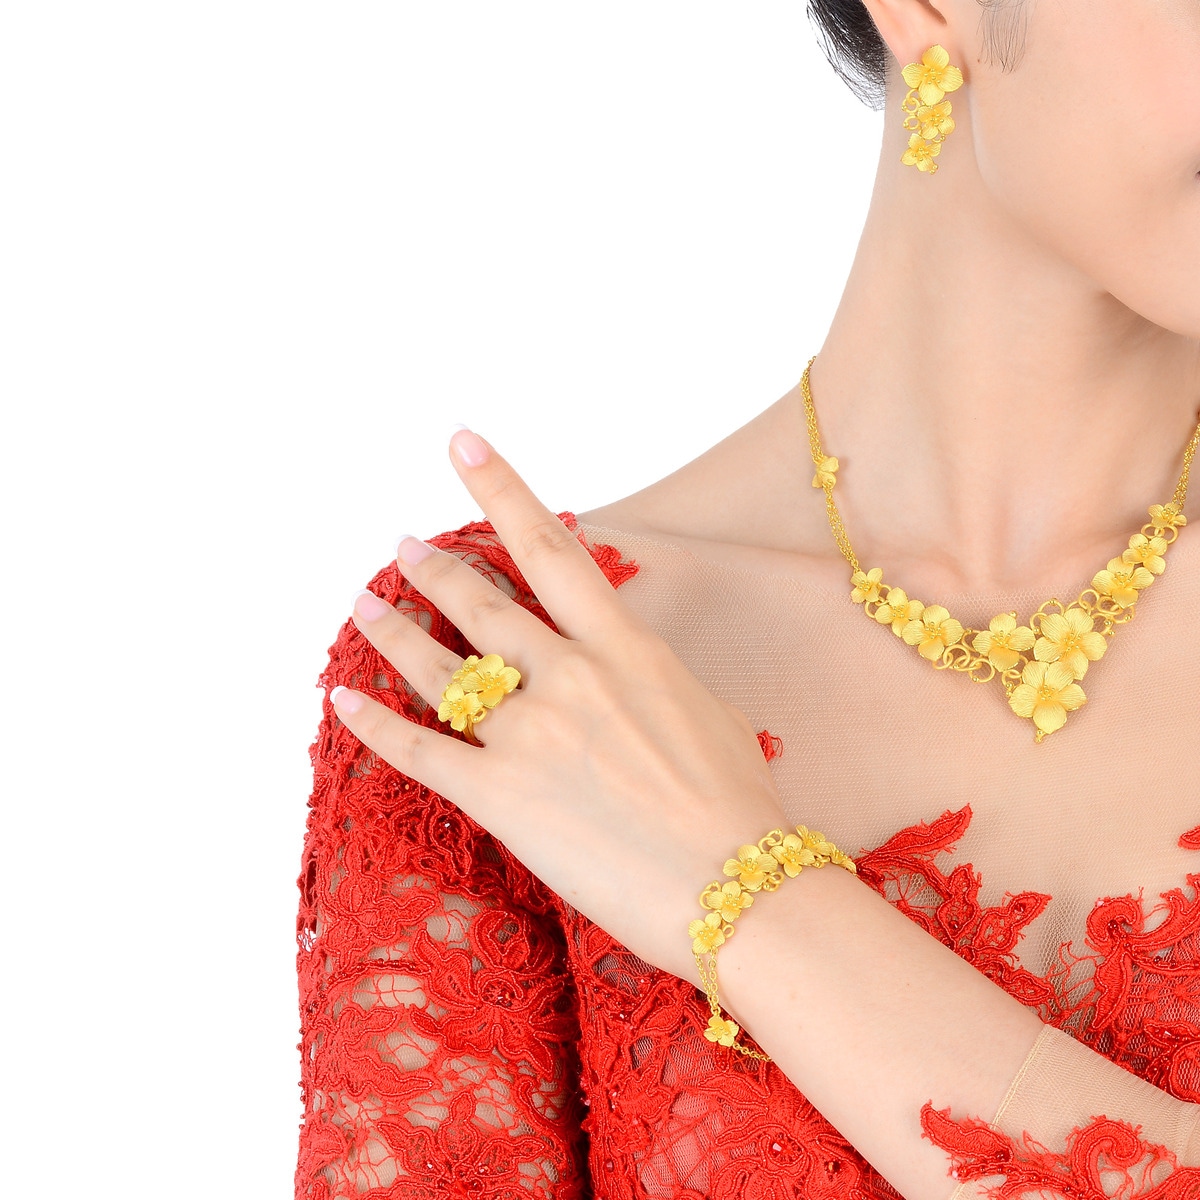 Chinese Wedding Collection 'Floral' 999.9 Gold Necklace | Chow Sang ...